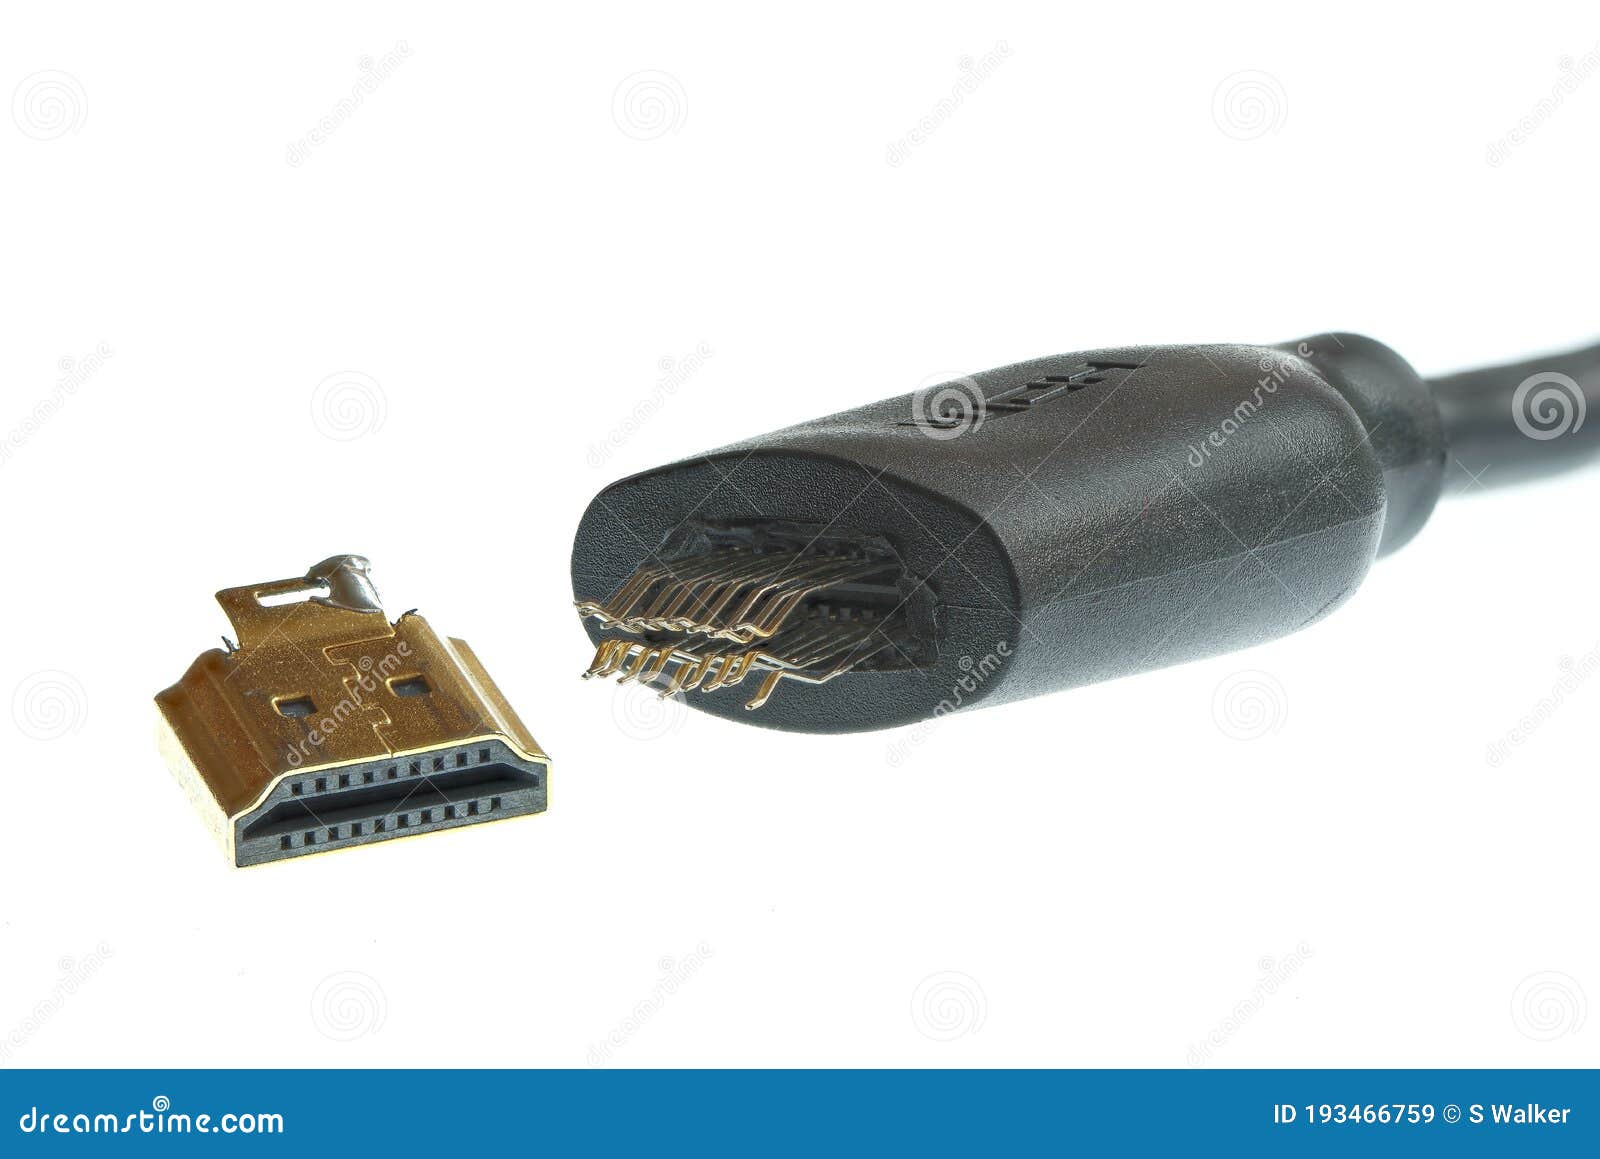 Broken HDMI Cable. Type a. Close Up. Stock Image - Image of pins, hdmi:  193466759